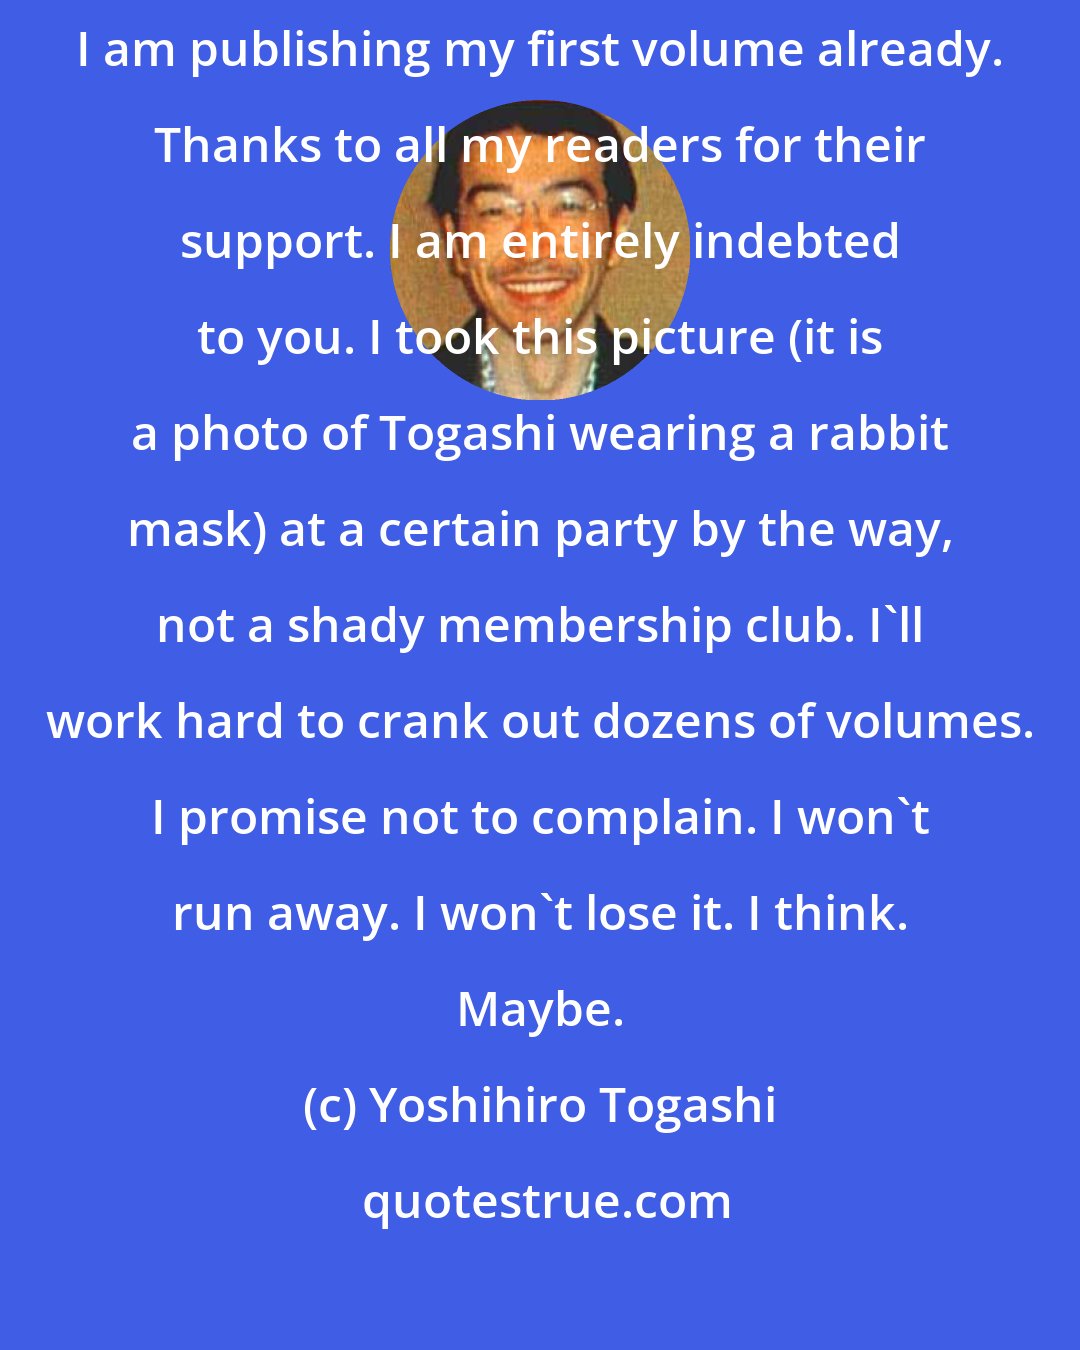 Yoshihiro Togashi: Yoshihiro Togashi here. I'm back doing a weekly serial, and here I am publishing my first volume already. Thanks to all my readers for their support. I am entirely indebted to you. I took this picture (it is a photo of Togashi wearing a rabbit mask) at a certain party by the way, not a shady membership club. I'll work hard to crank out dozens of volumes. I promise not to complain. I won't run away. I won't lose it. I think. Maybe.